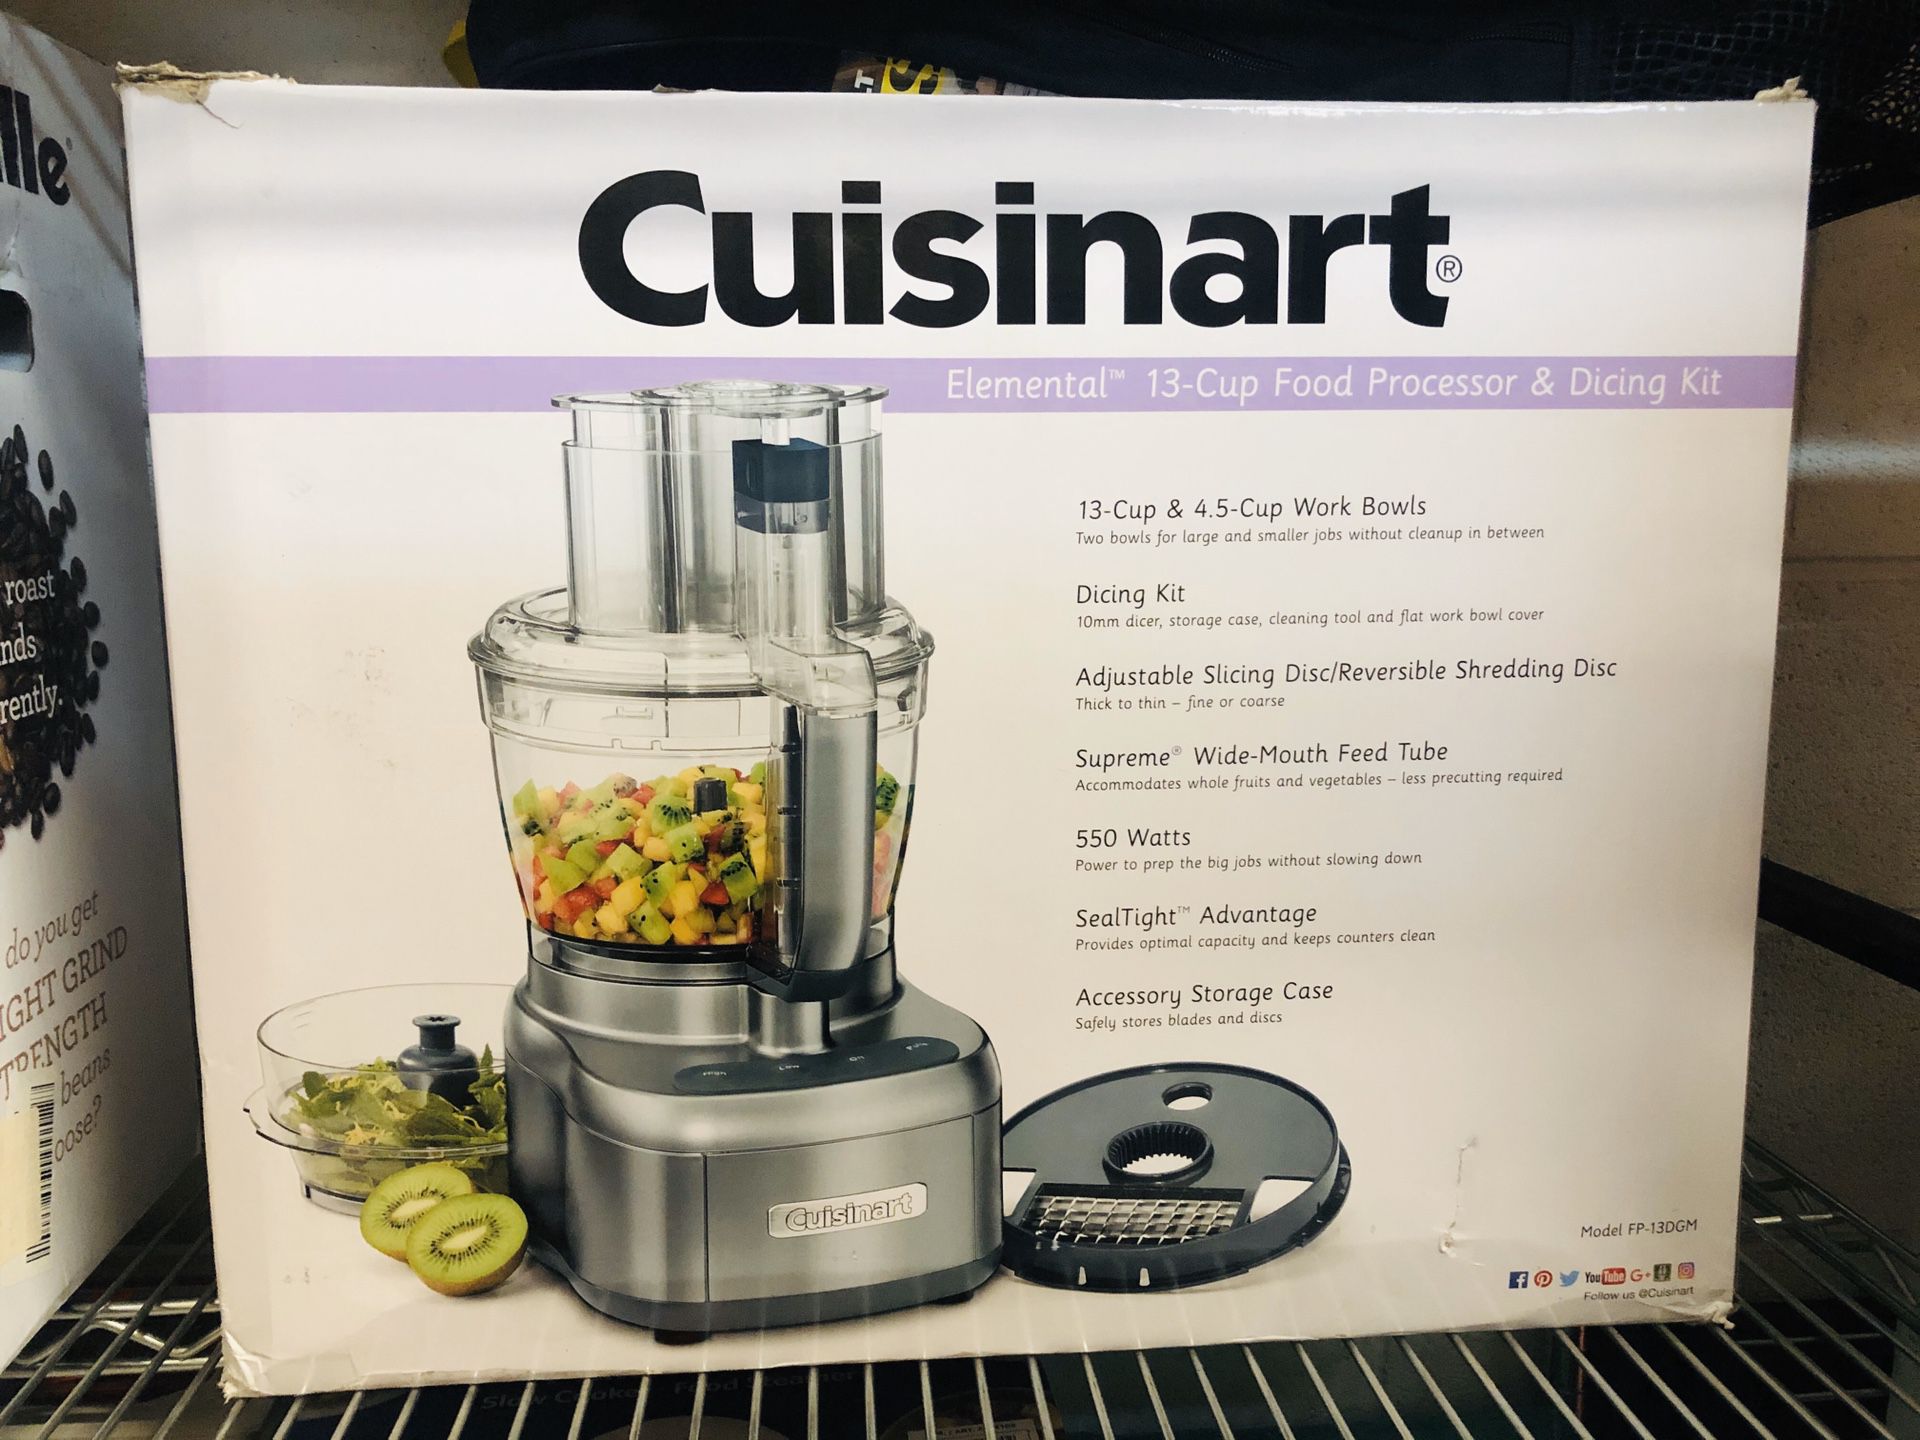 Cuisinart Elemental 13-Cup Food Processor with Dicing